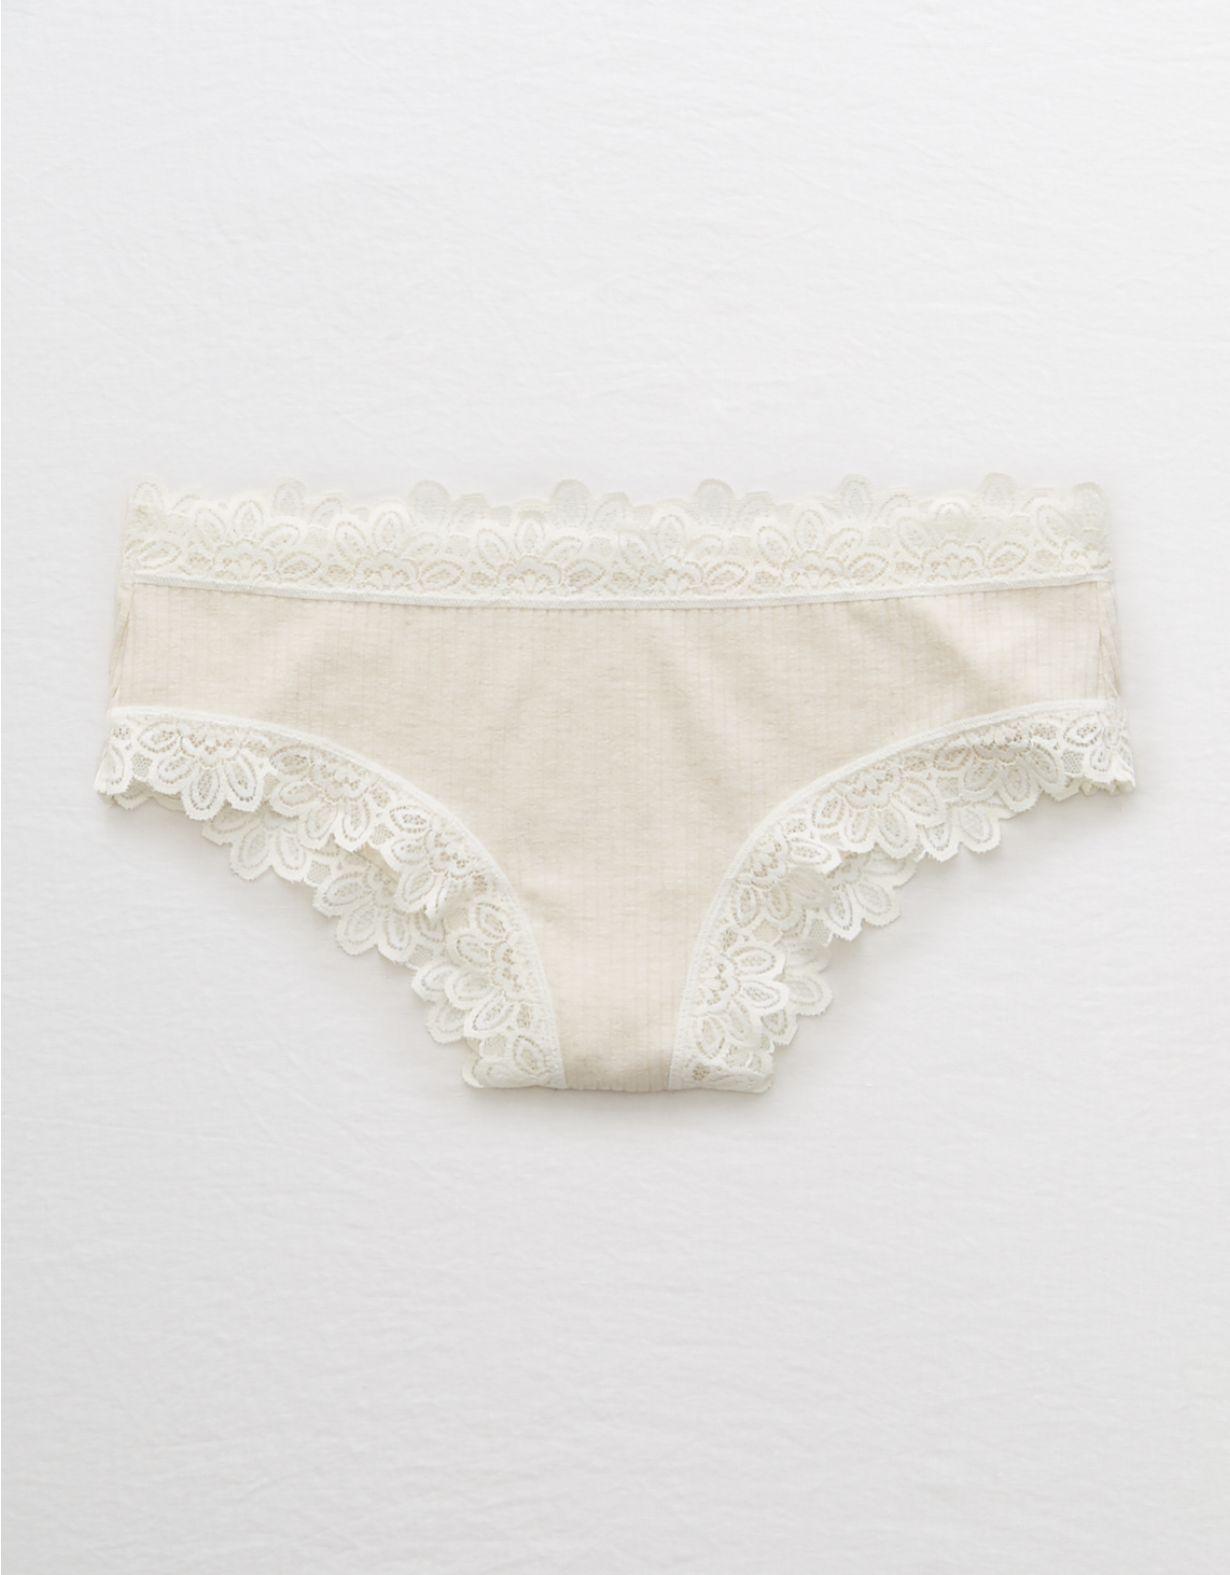 Aerie Ribbed Lace Trim Cheeky Underwear